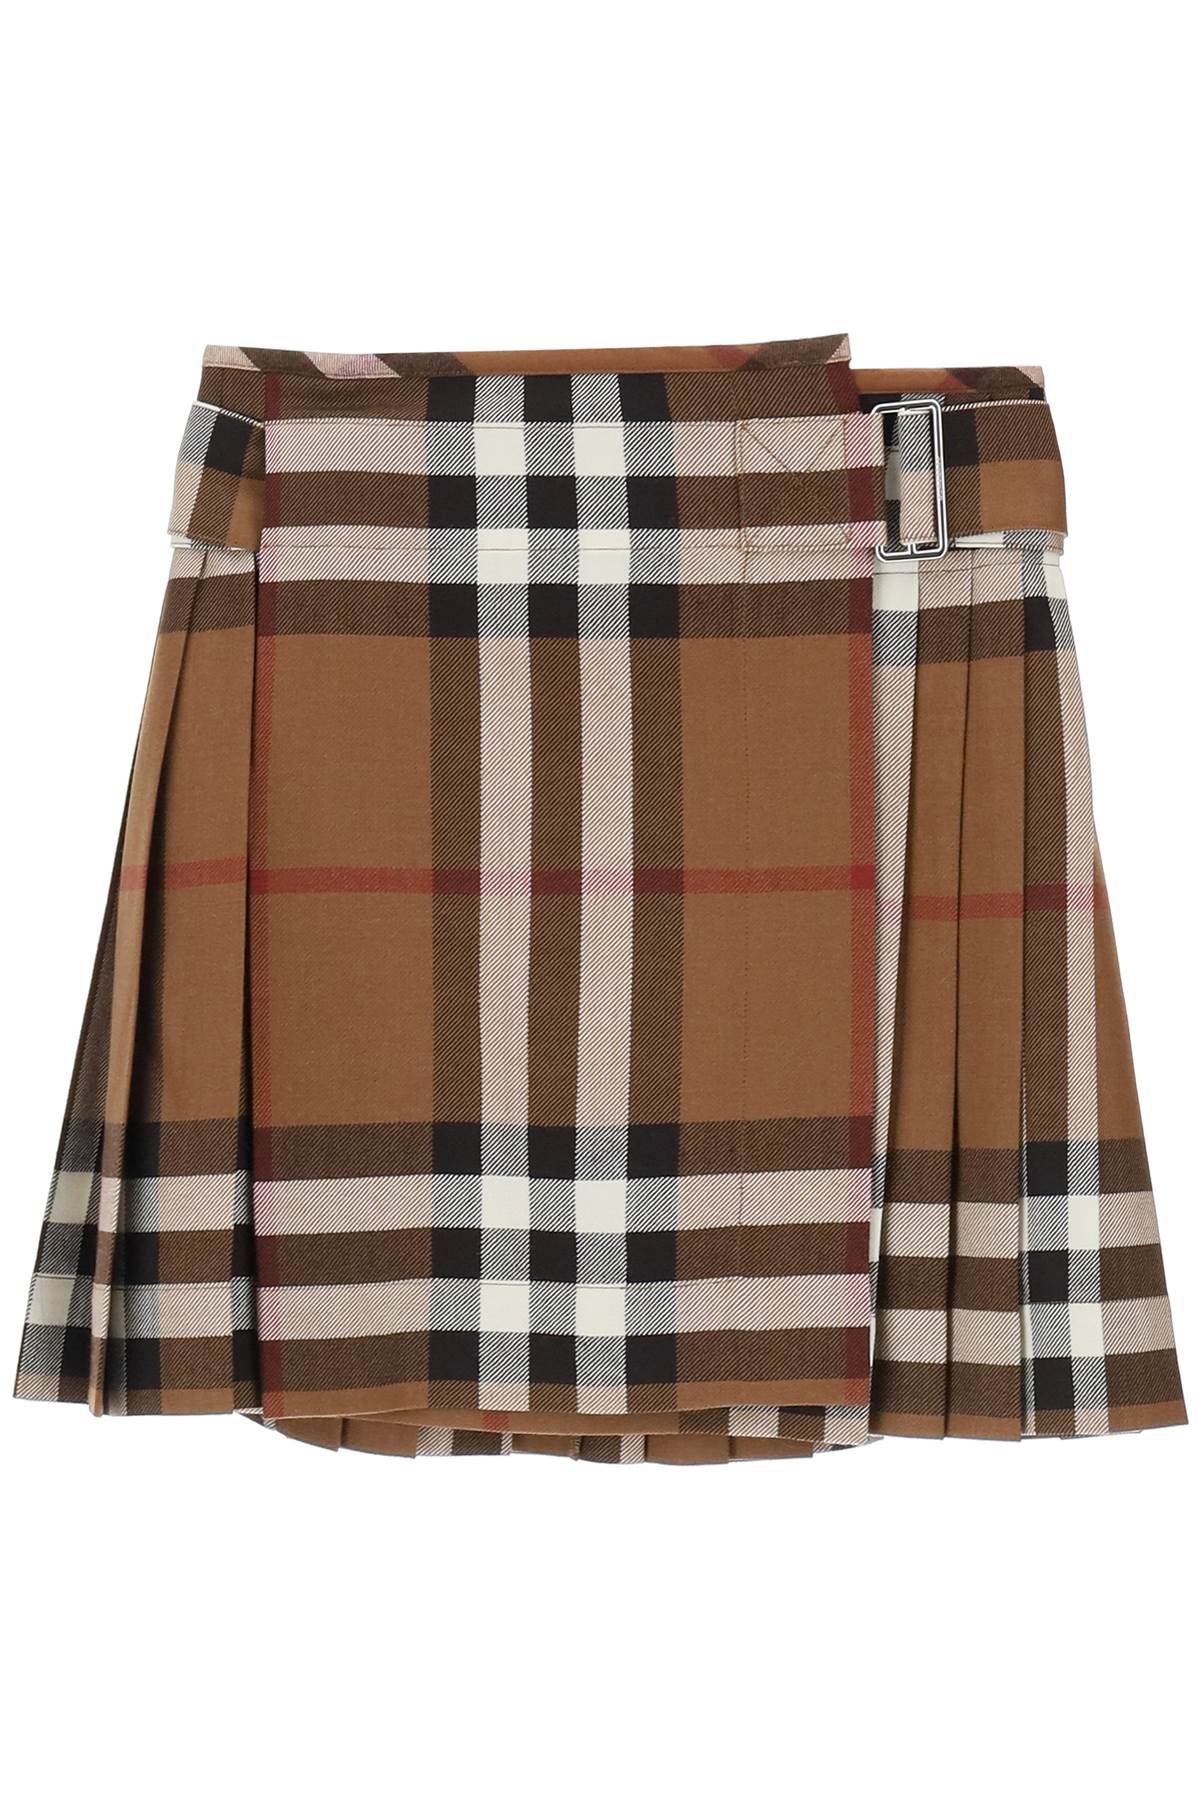 Burberry Pleated Mini Skirt In Exaggerated Check Wool Flannel For Women In Brown